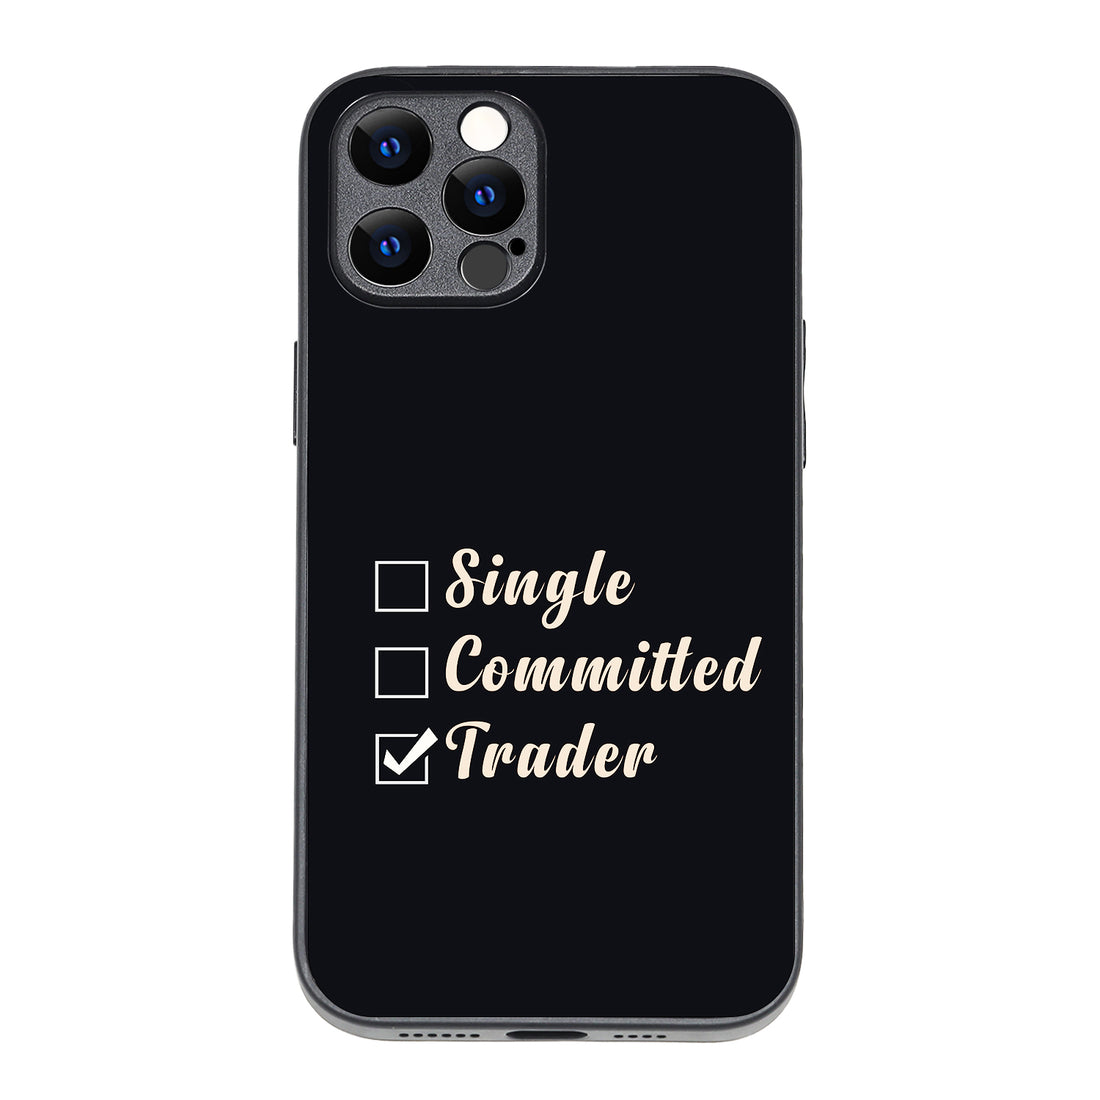 Single, Commited, Trader Trading iPhone 12 Pro Max Case